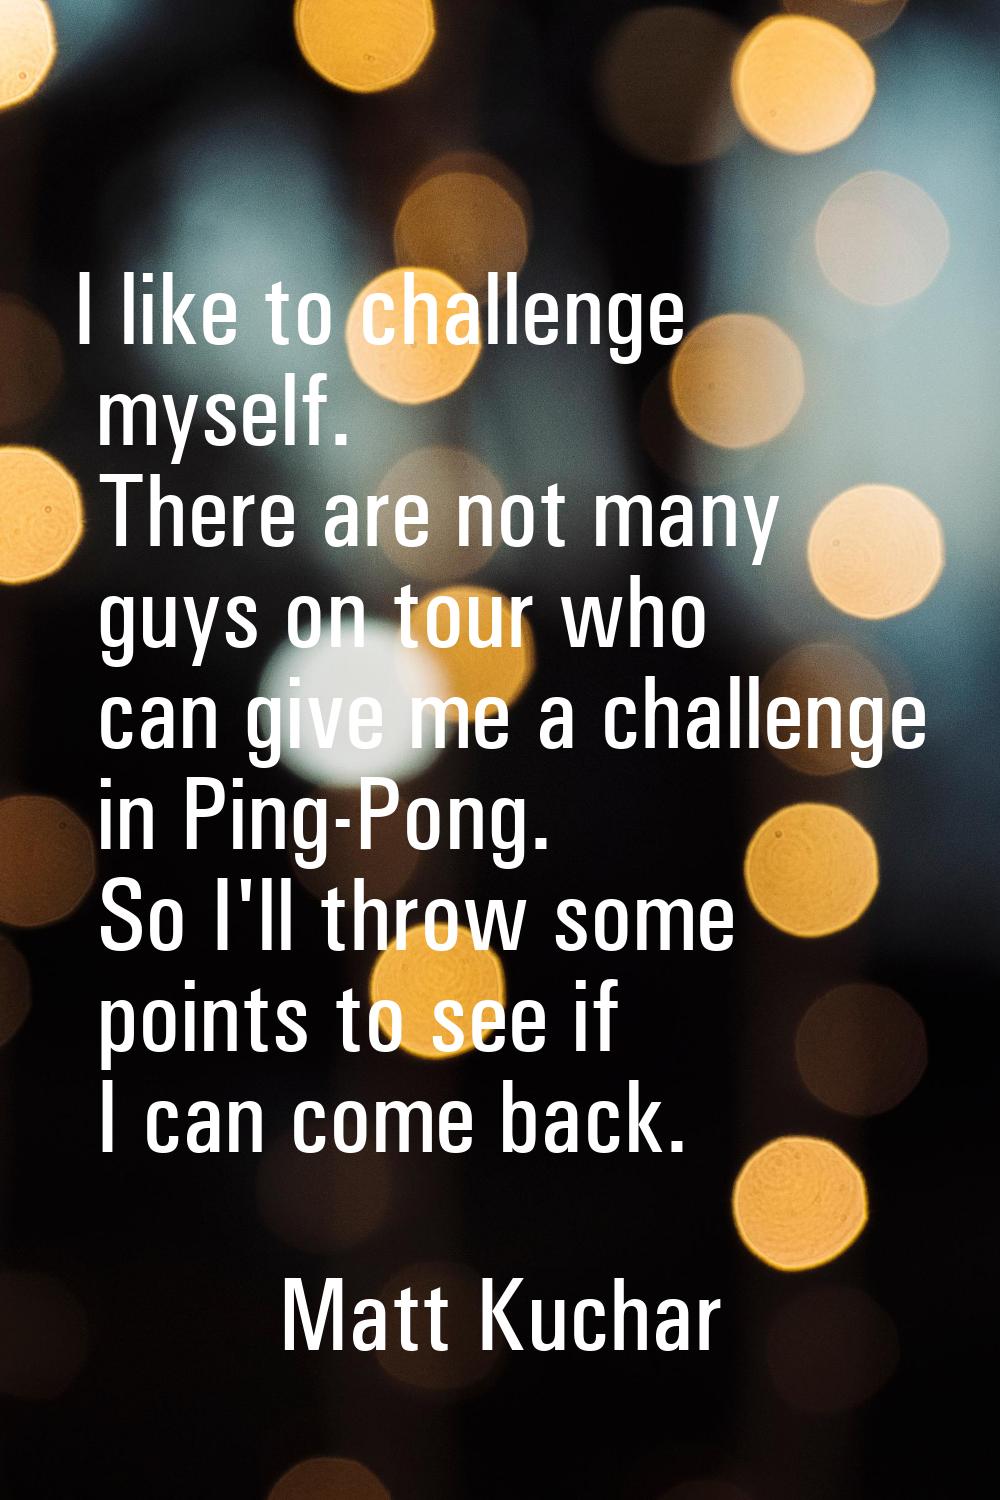 I like to challenge myself. There are not many guys on tour who can give me a challenge in Ping-Pon